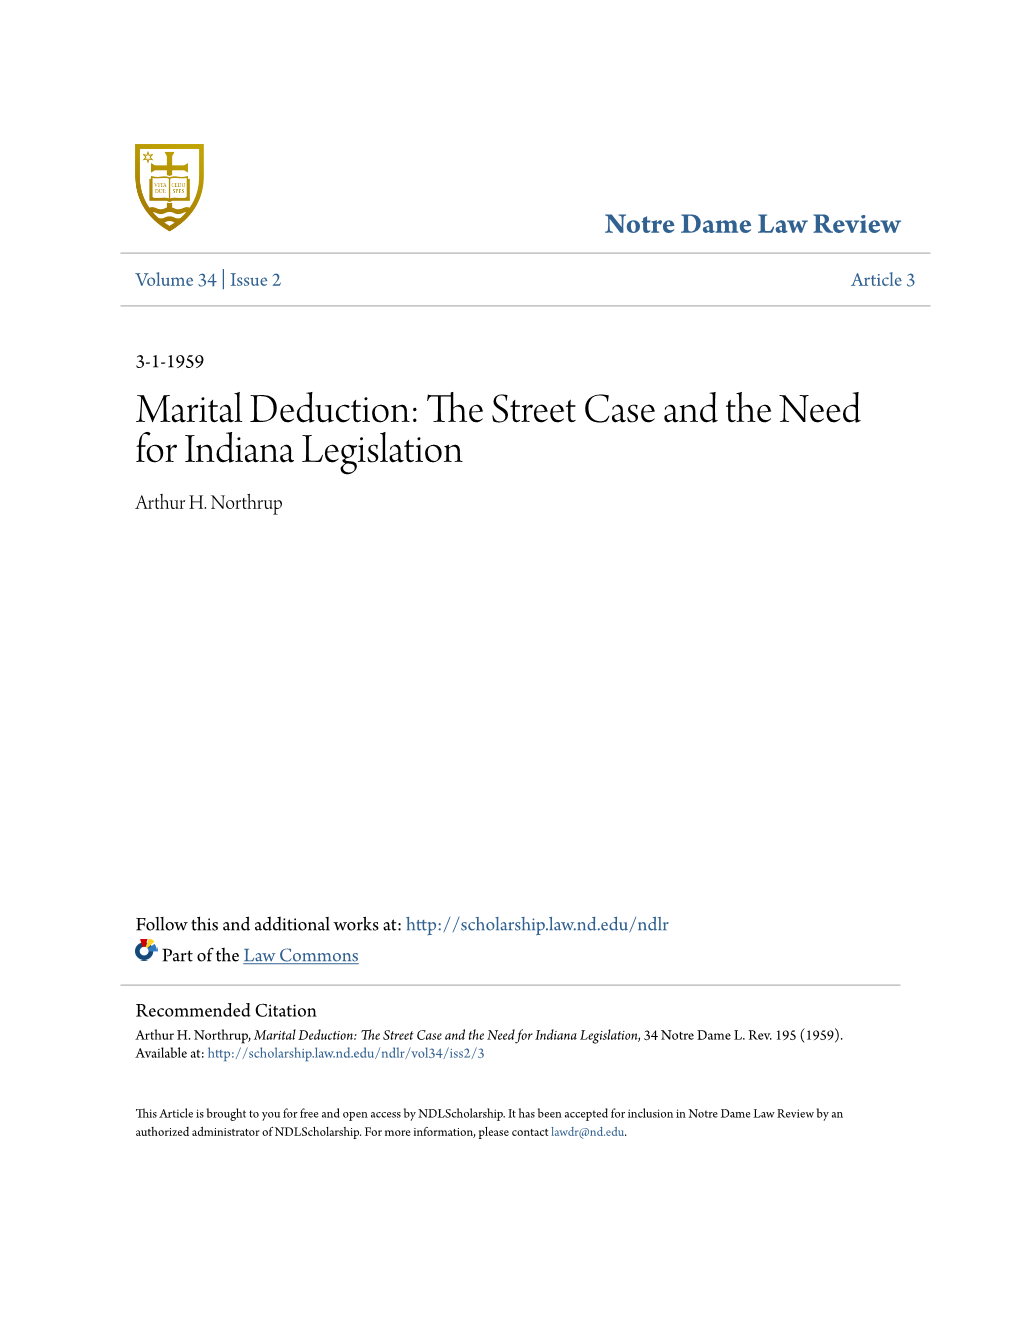 Marital Deduction: the Street Case and the Need for Indiana Legislation, 34 Notre Dame L